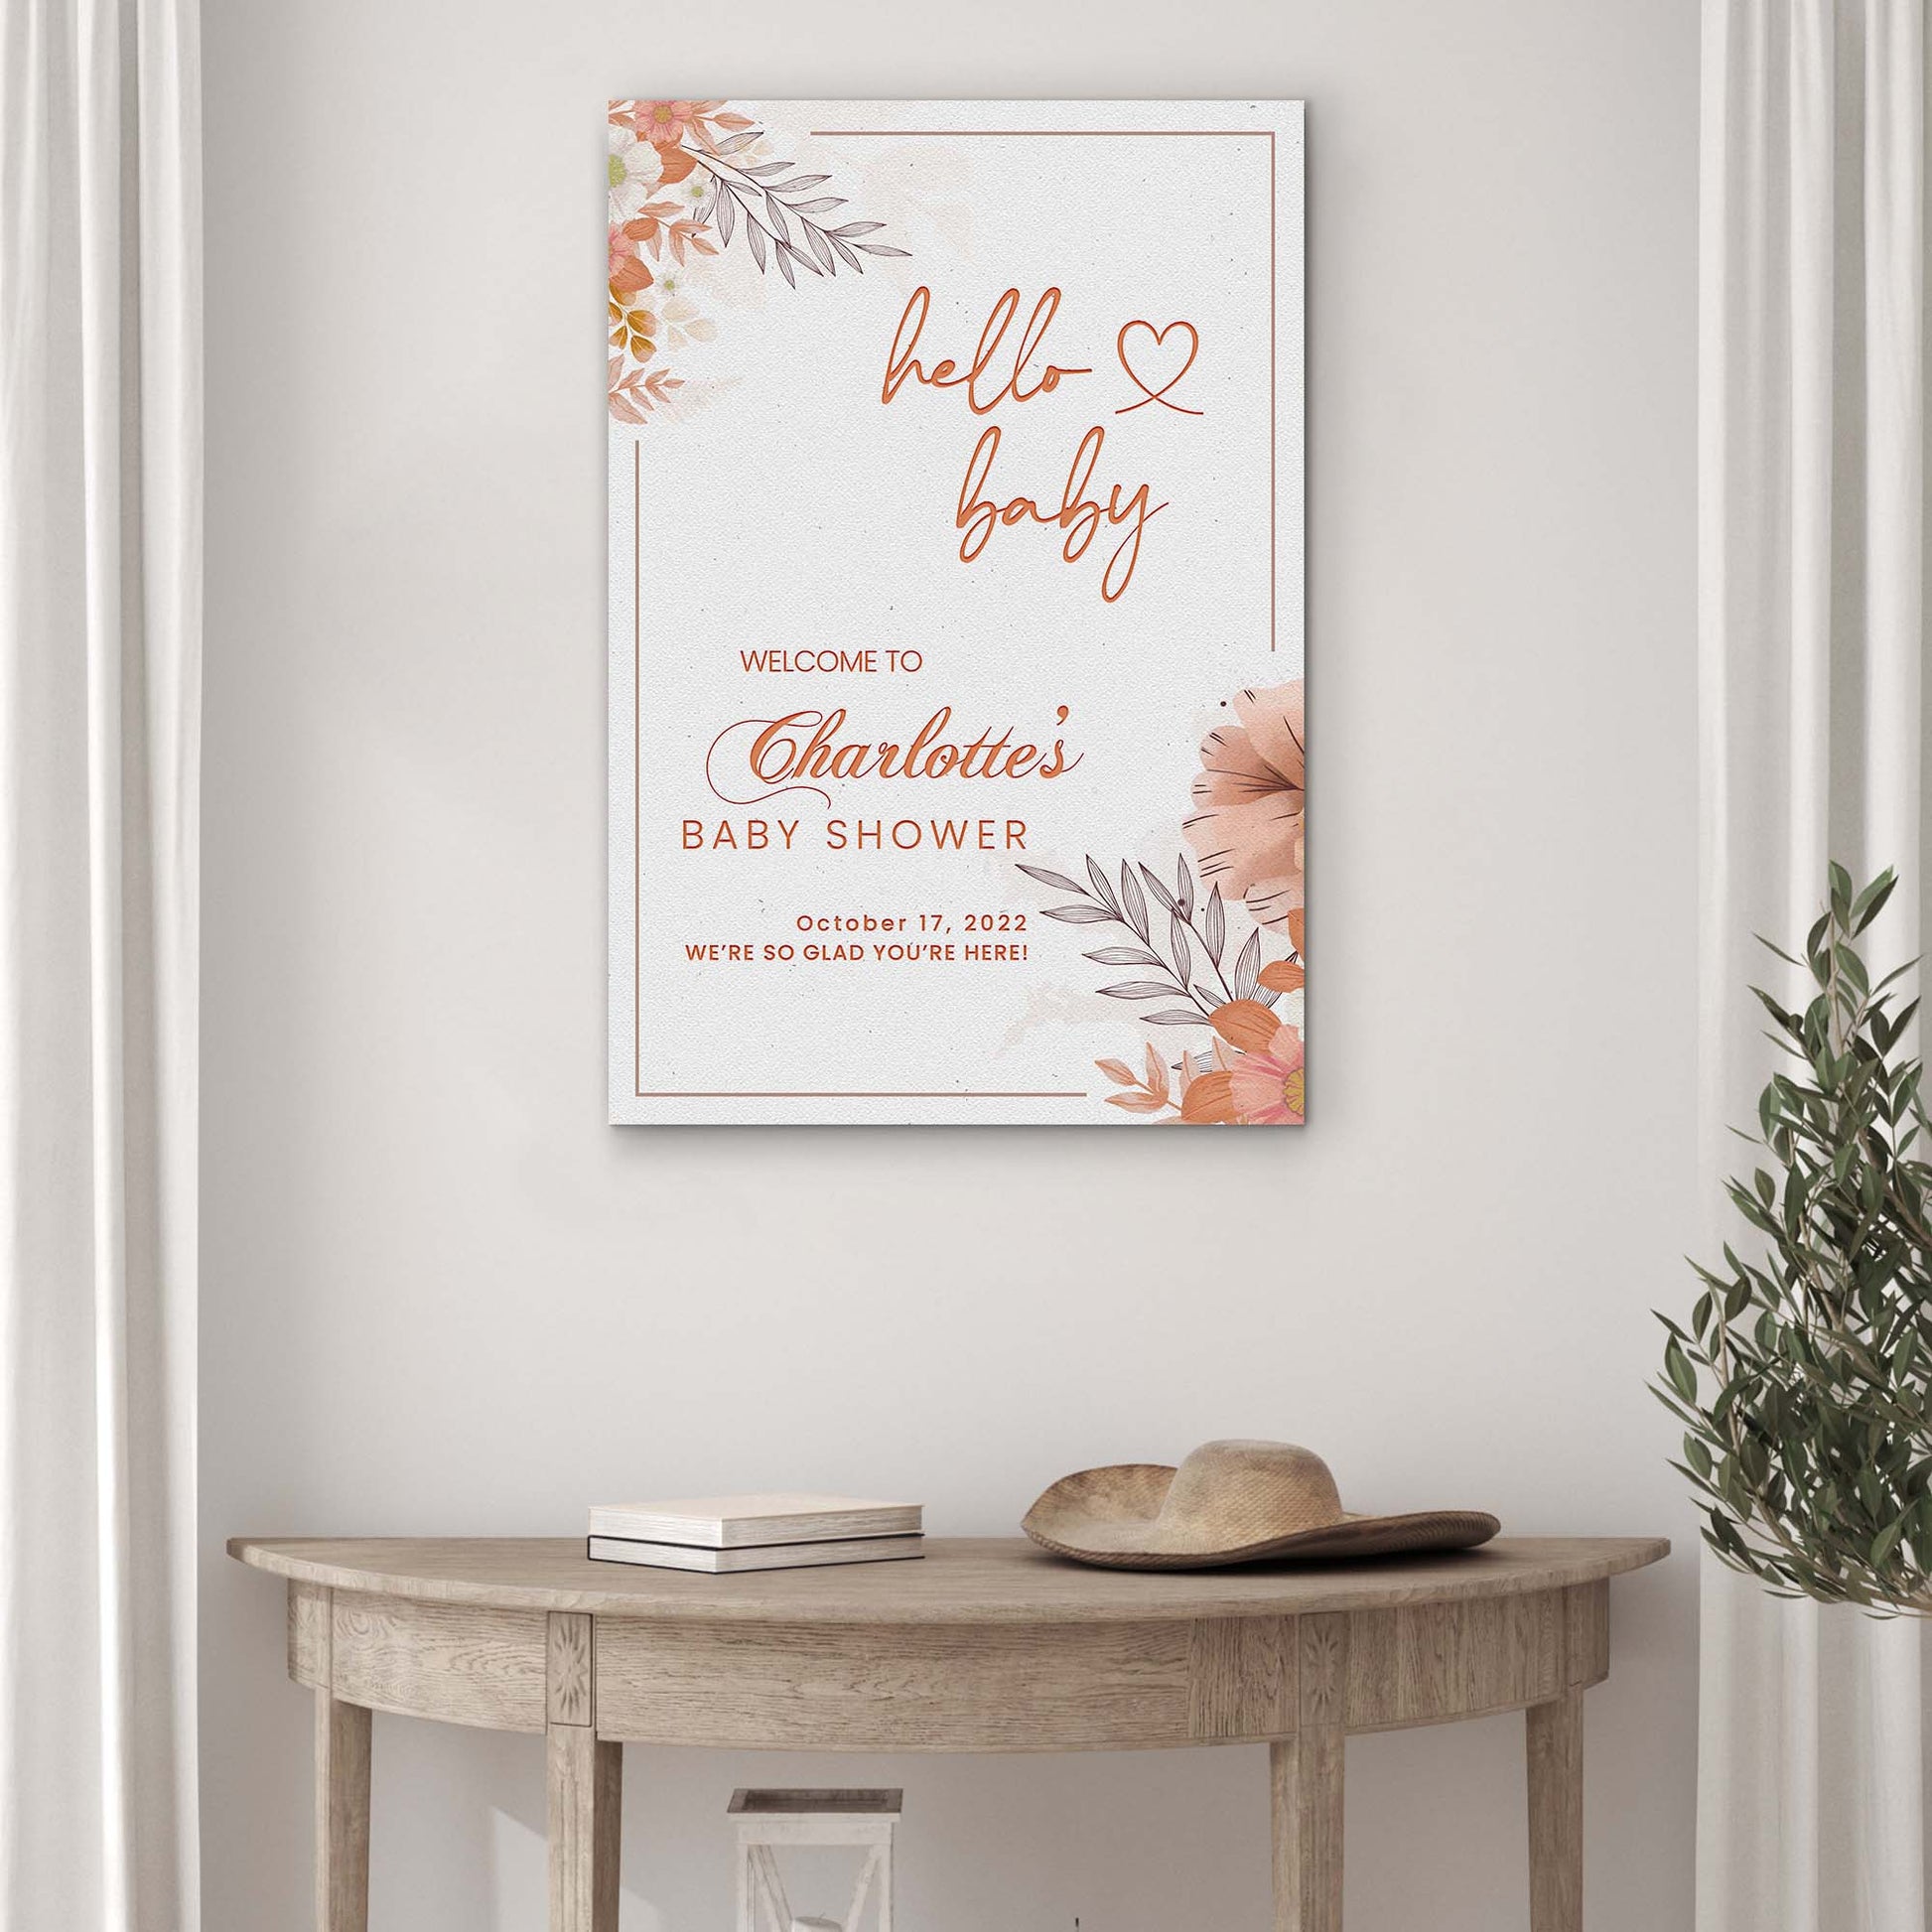 Hello Baby, Baby Shower Portrait Sign Style 1 - Image by Tailored Canvases